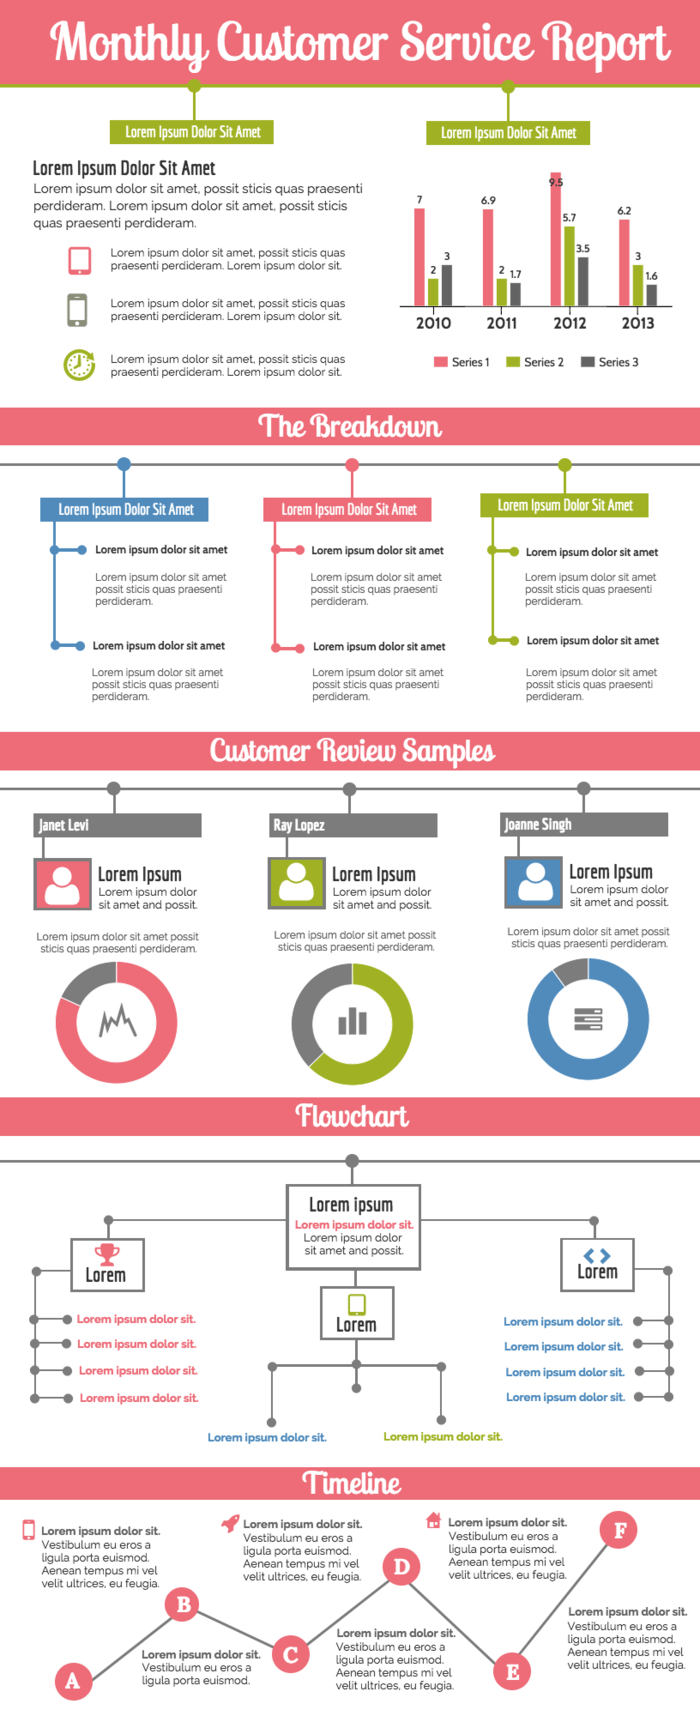 Monthly Customer Service Report Template  Venngage intended for Monthly Board Report Template